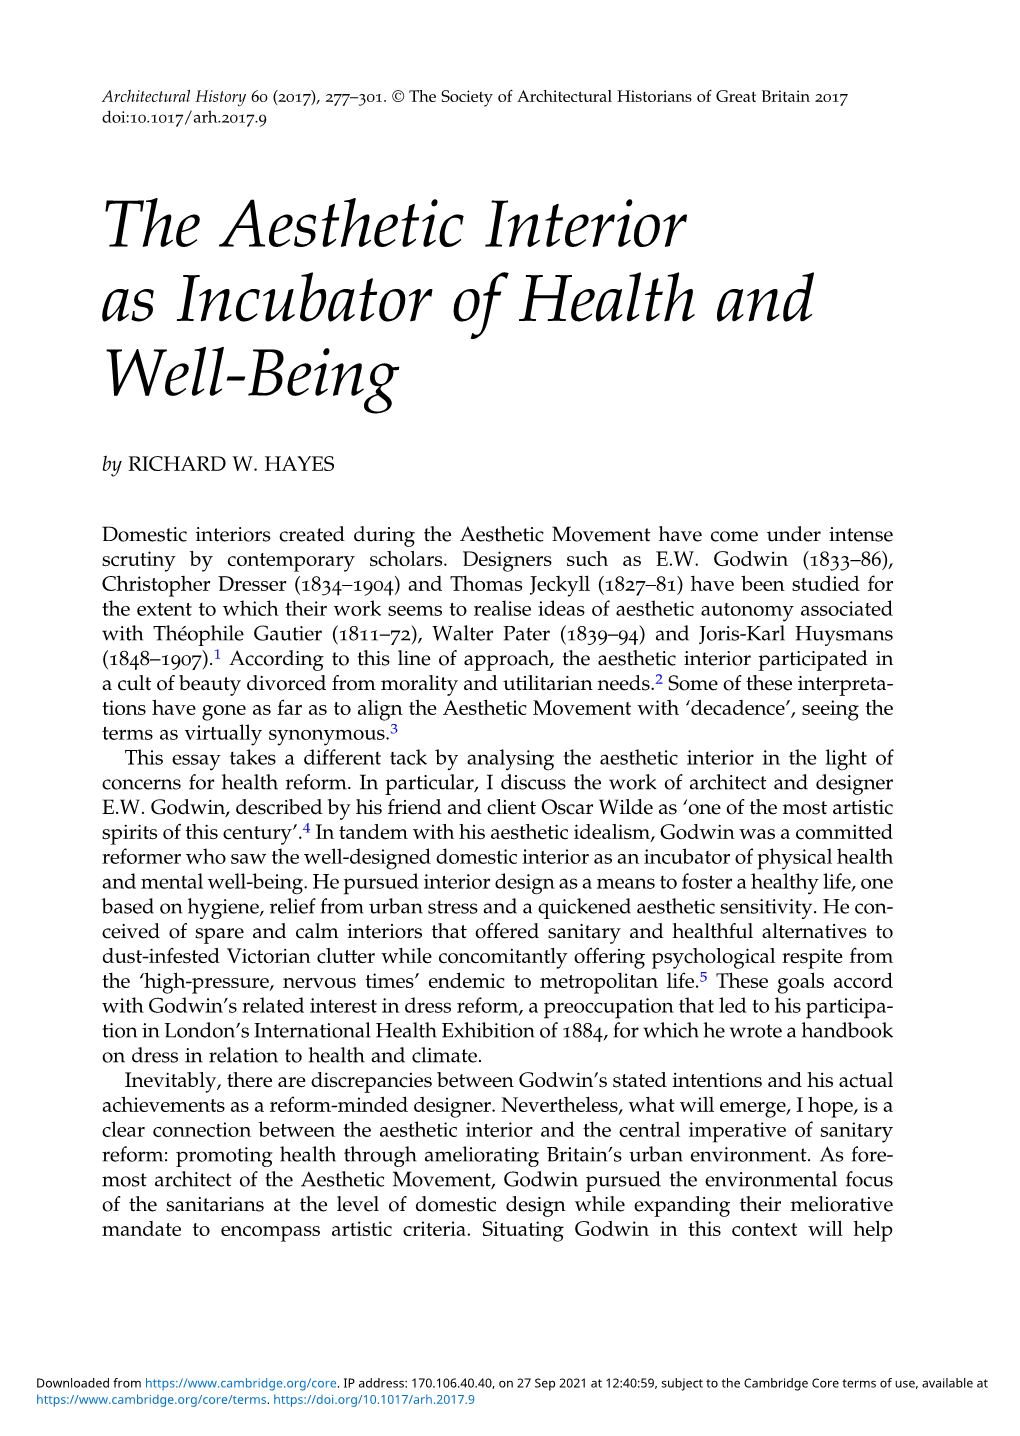 The Aesthetic Interior As Incubator of Health and Well-Being